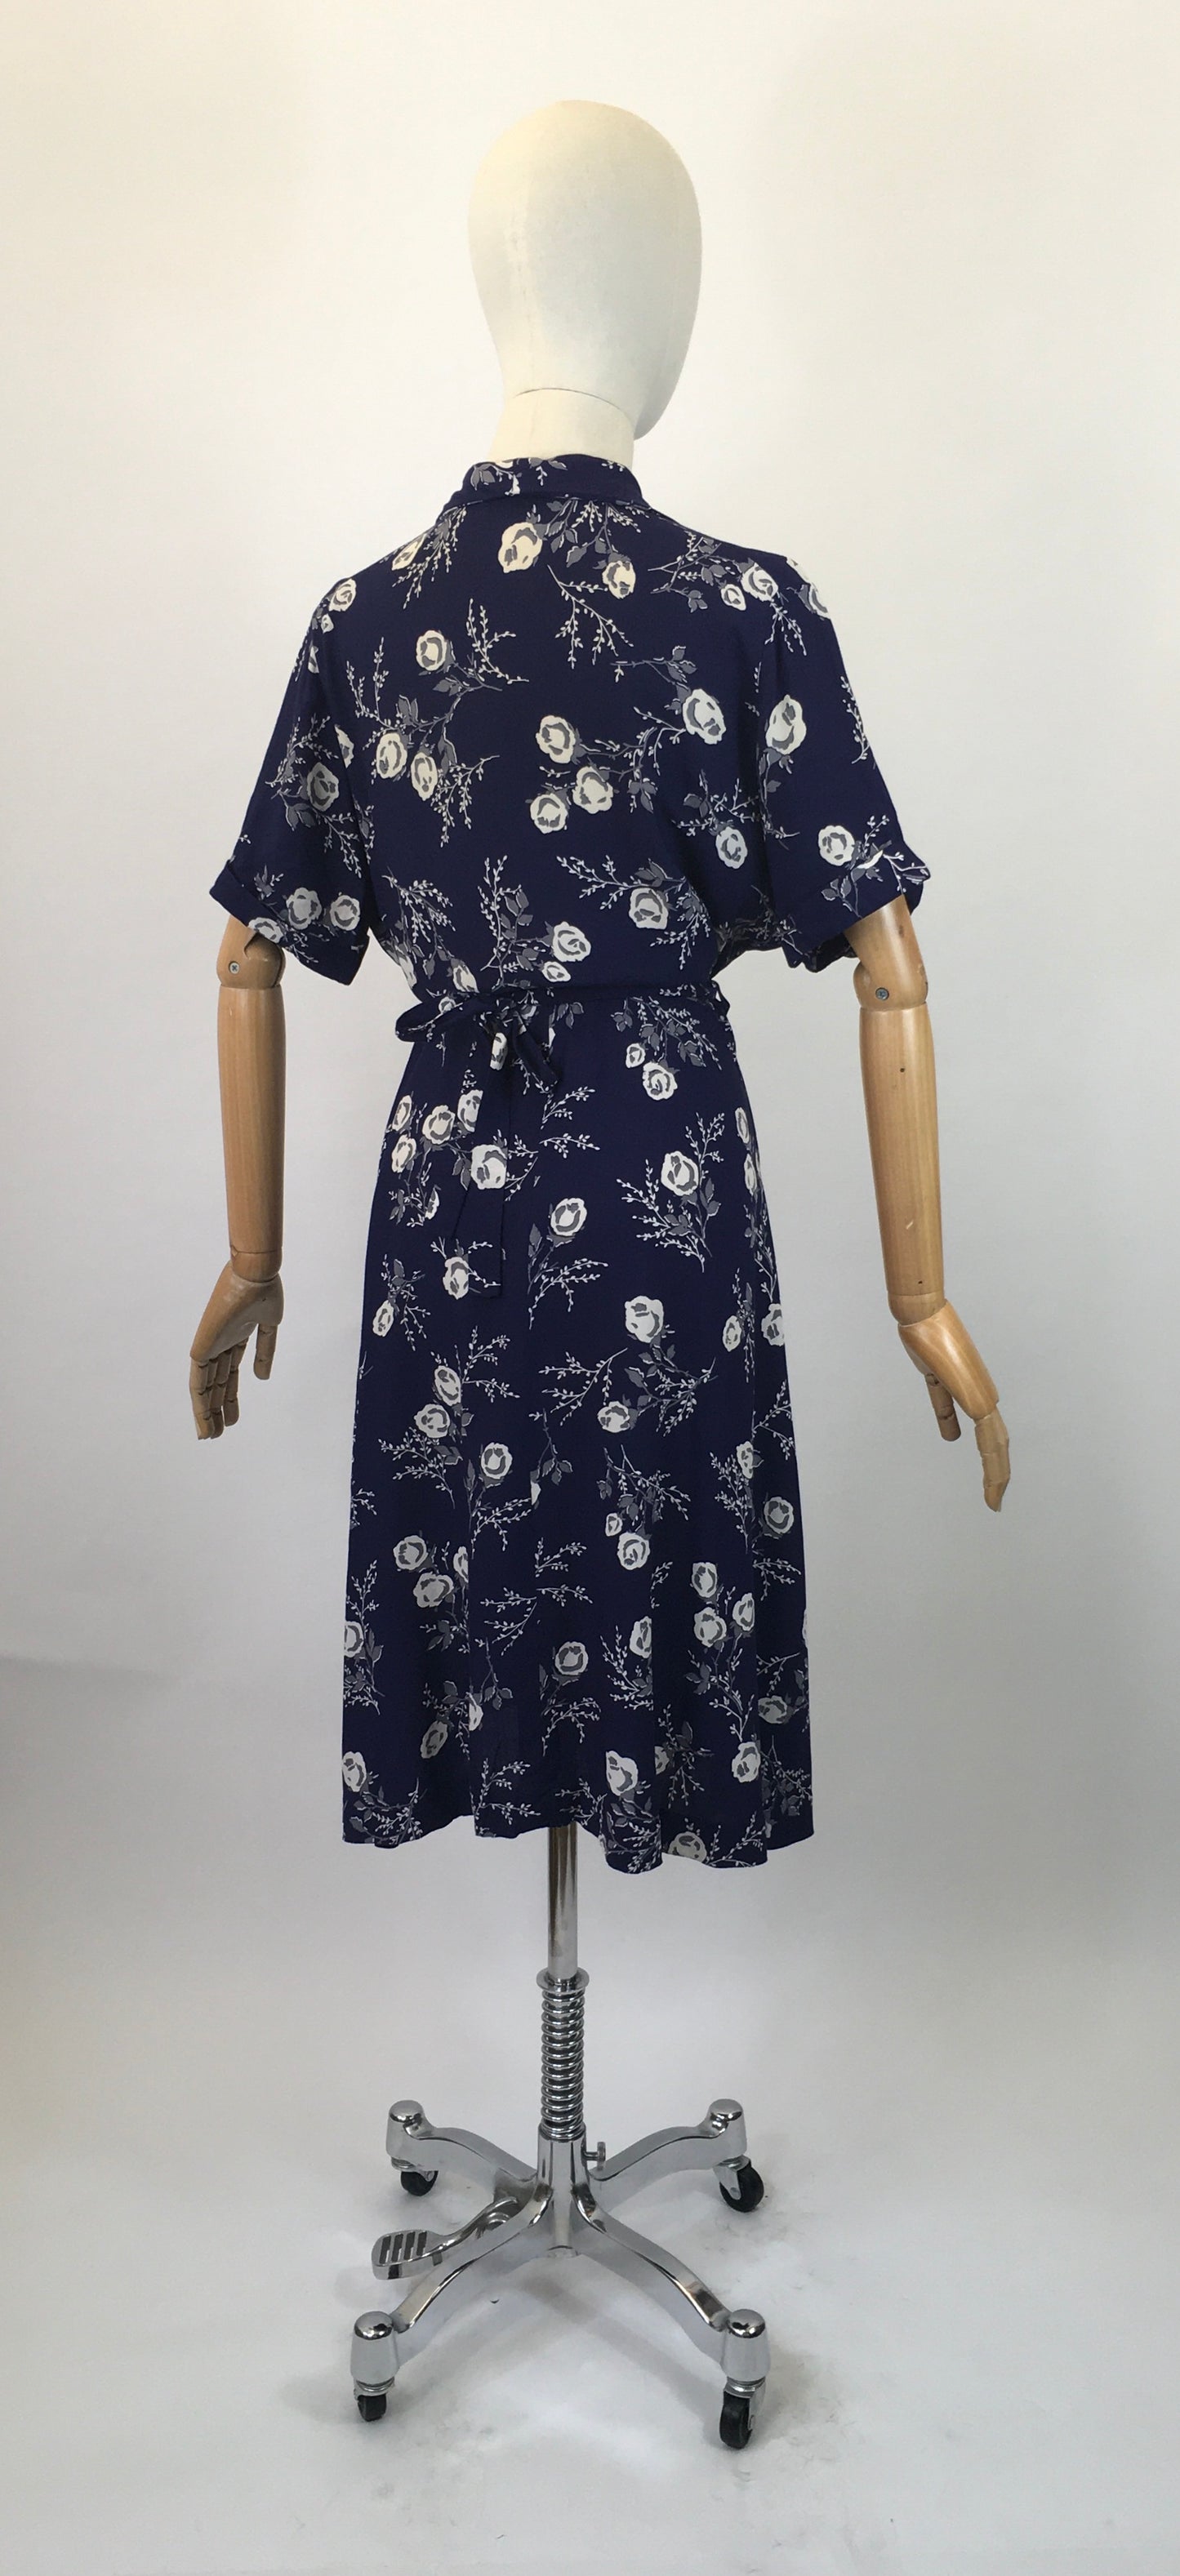 Original 1940’s Floral Cotton Shirtwaister dress - In hues of Cream and grey flowers